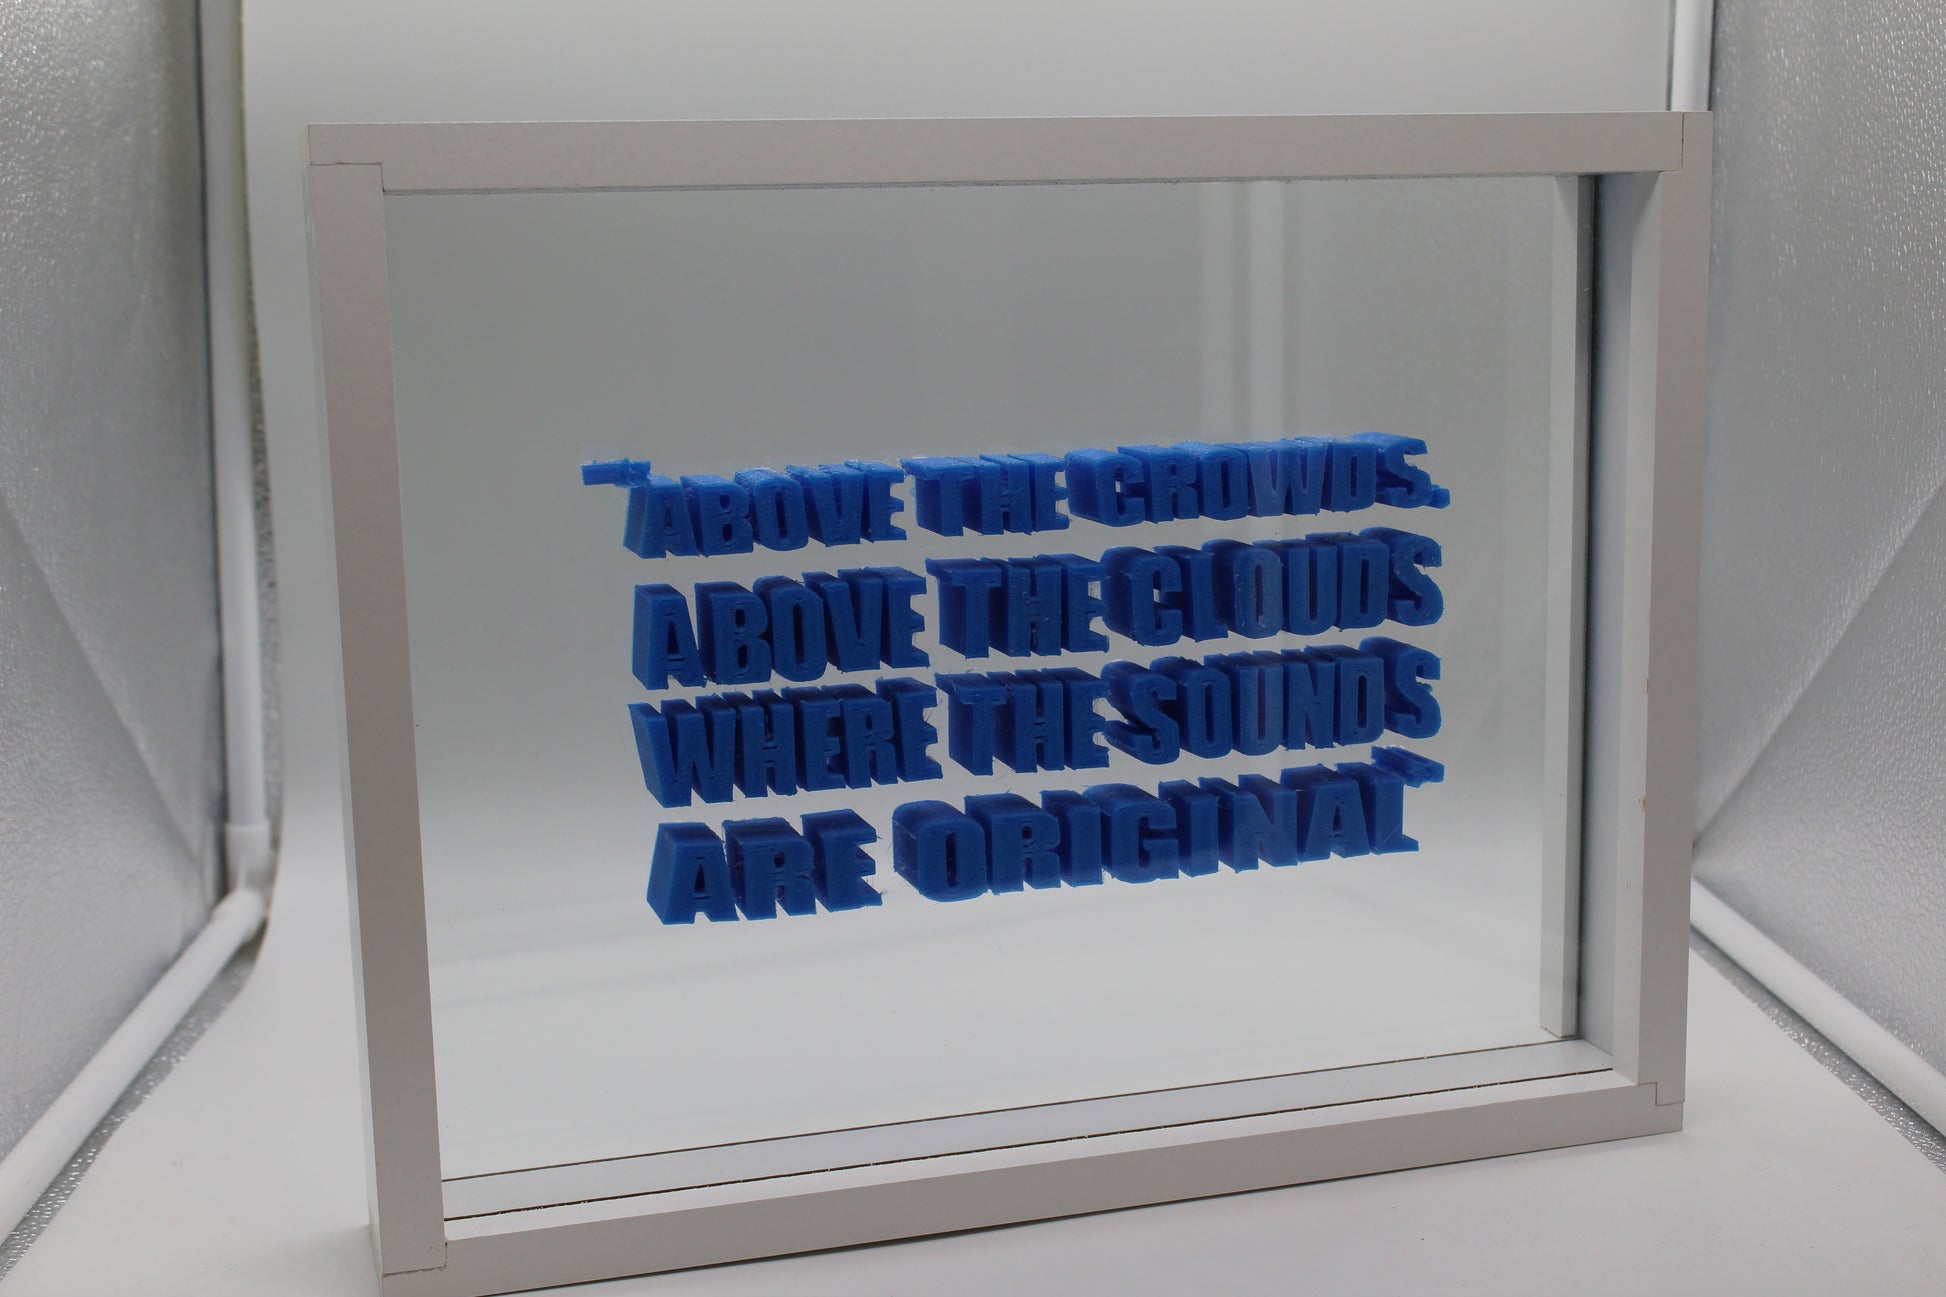 White box framing a glass sheet with blue plastic letters in between the slates of glass, background is in a small white and silver photobox, it reads , '"Above the crowds, above the clouds, where the sounds are original" in capital letters